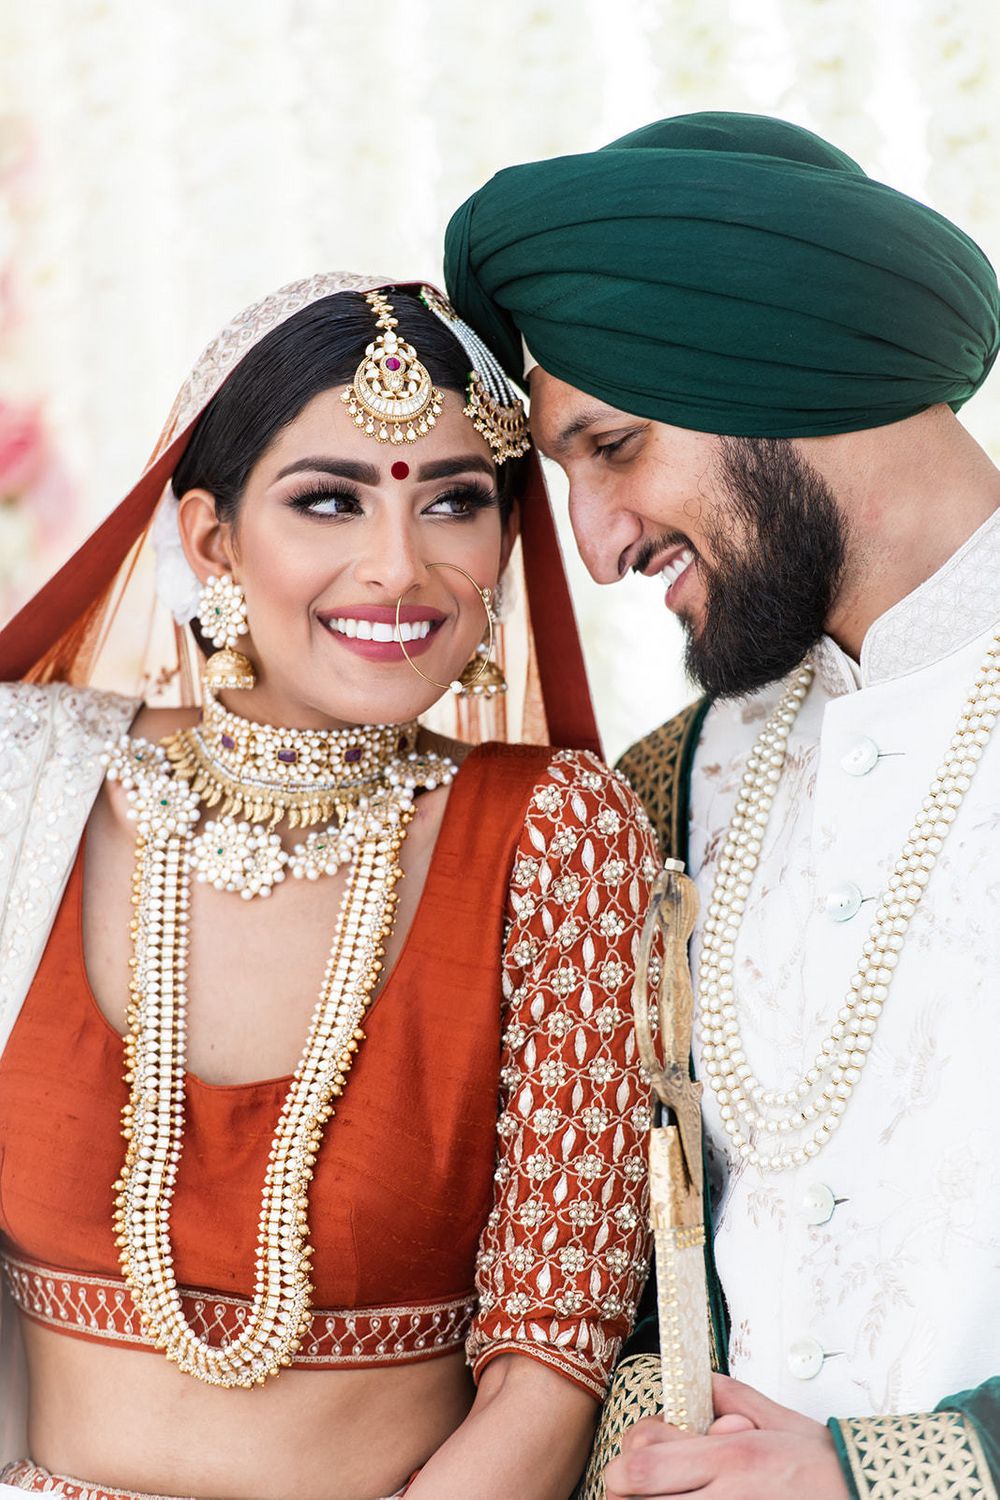 Photo of Bridal portrait with layered jewellery and happy groom